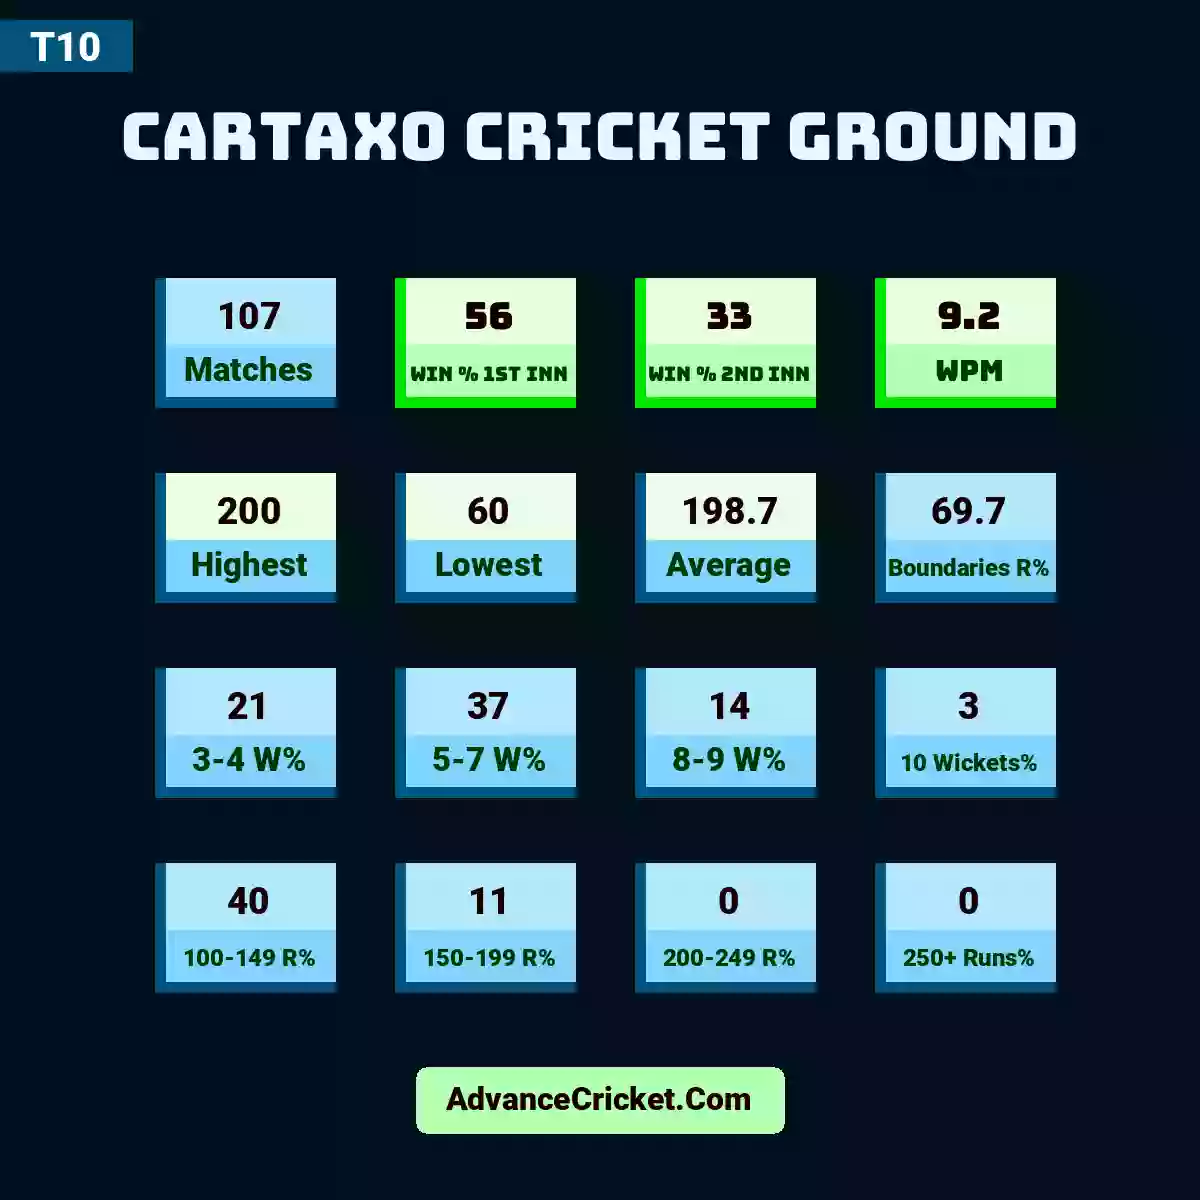 Image showing Cartaxo Cricket Ground T10 with Matches: 104, Win % 1st Inn: 57, Win % 2nd Inn: 32, WPM: 9.2, Highest: 200, Lowest: 60, Average: 197.2, Boundaries R%: 69.5, 3-4 W%: 22, 5-7 W%: 37, 8-9 W%: 14, 10 Wickets%: 2, 100-149 R%: 41, 150-199 R%: 10, 200-249 R%: 0, 250+ Runs%: 0.